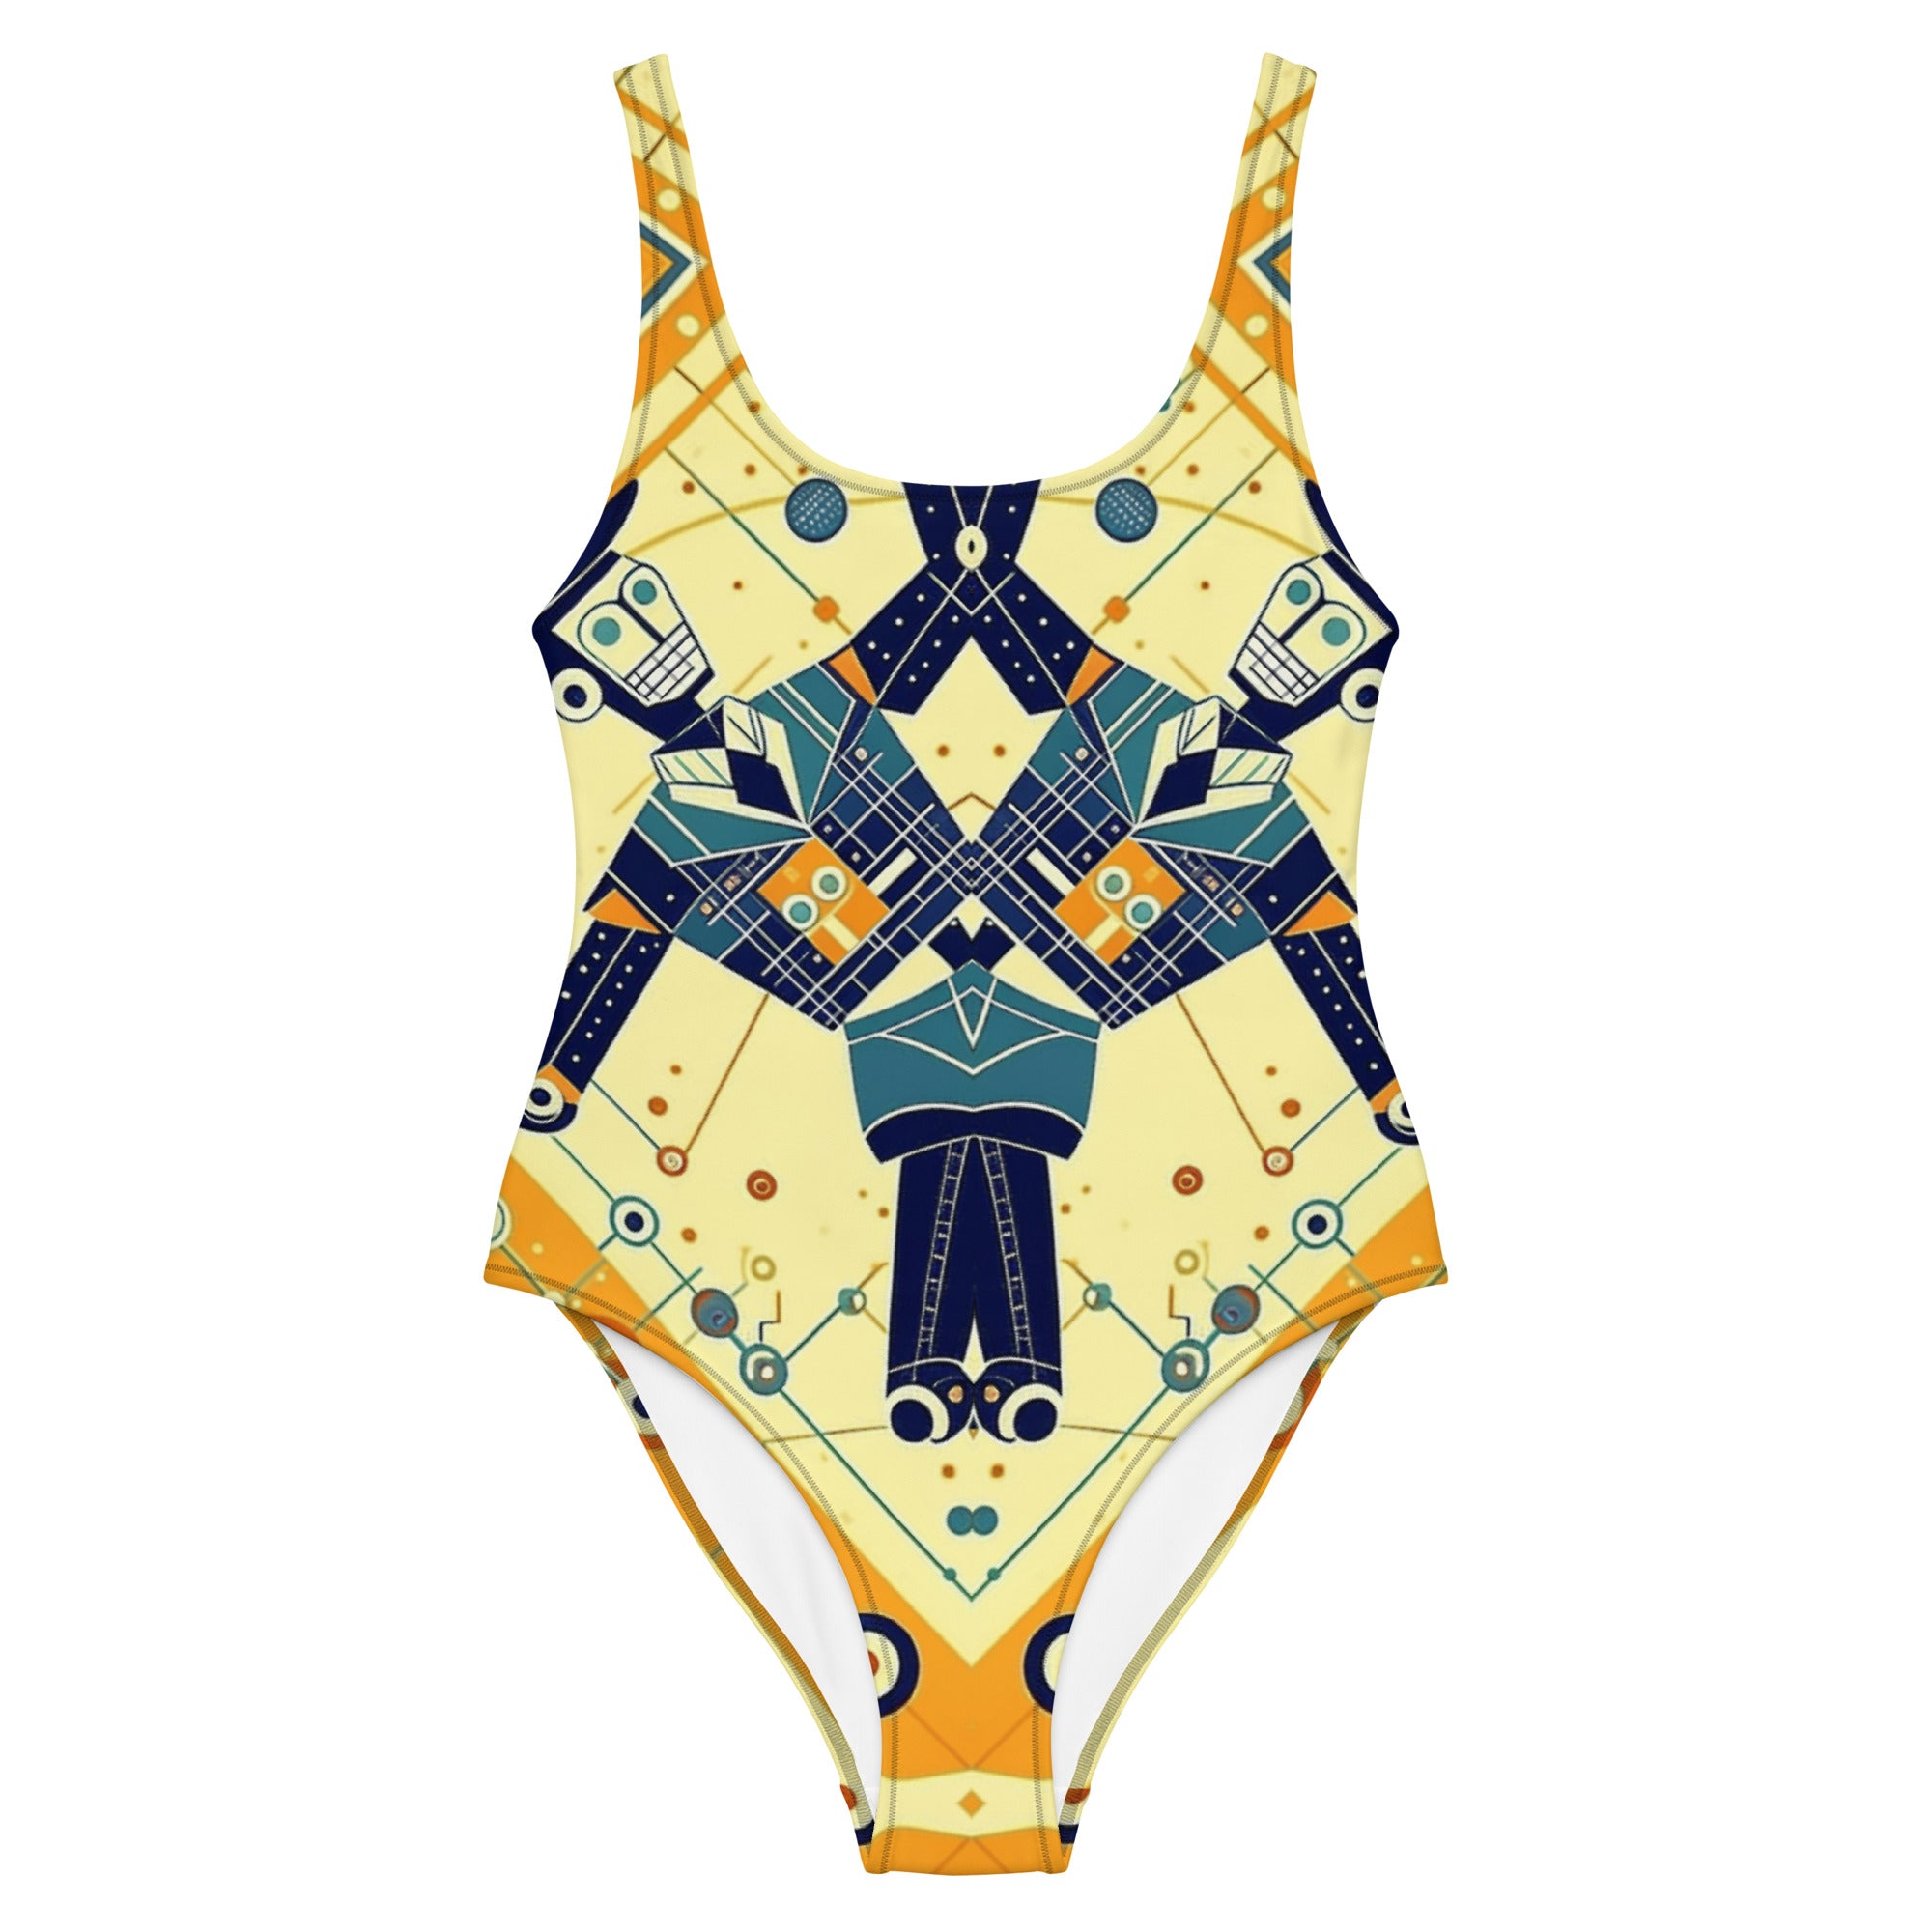 This ELECTRO SWING RAVE BODYSUIT offers a futuristic look for any rave or festival. It features a unique robotic-inspired electro-swing pattern that will stand out in any crowd. It is a perfect choice for a festival fashion statement